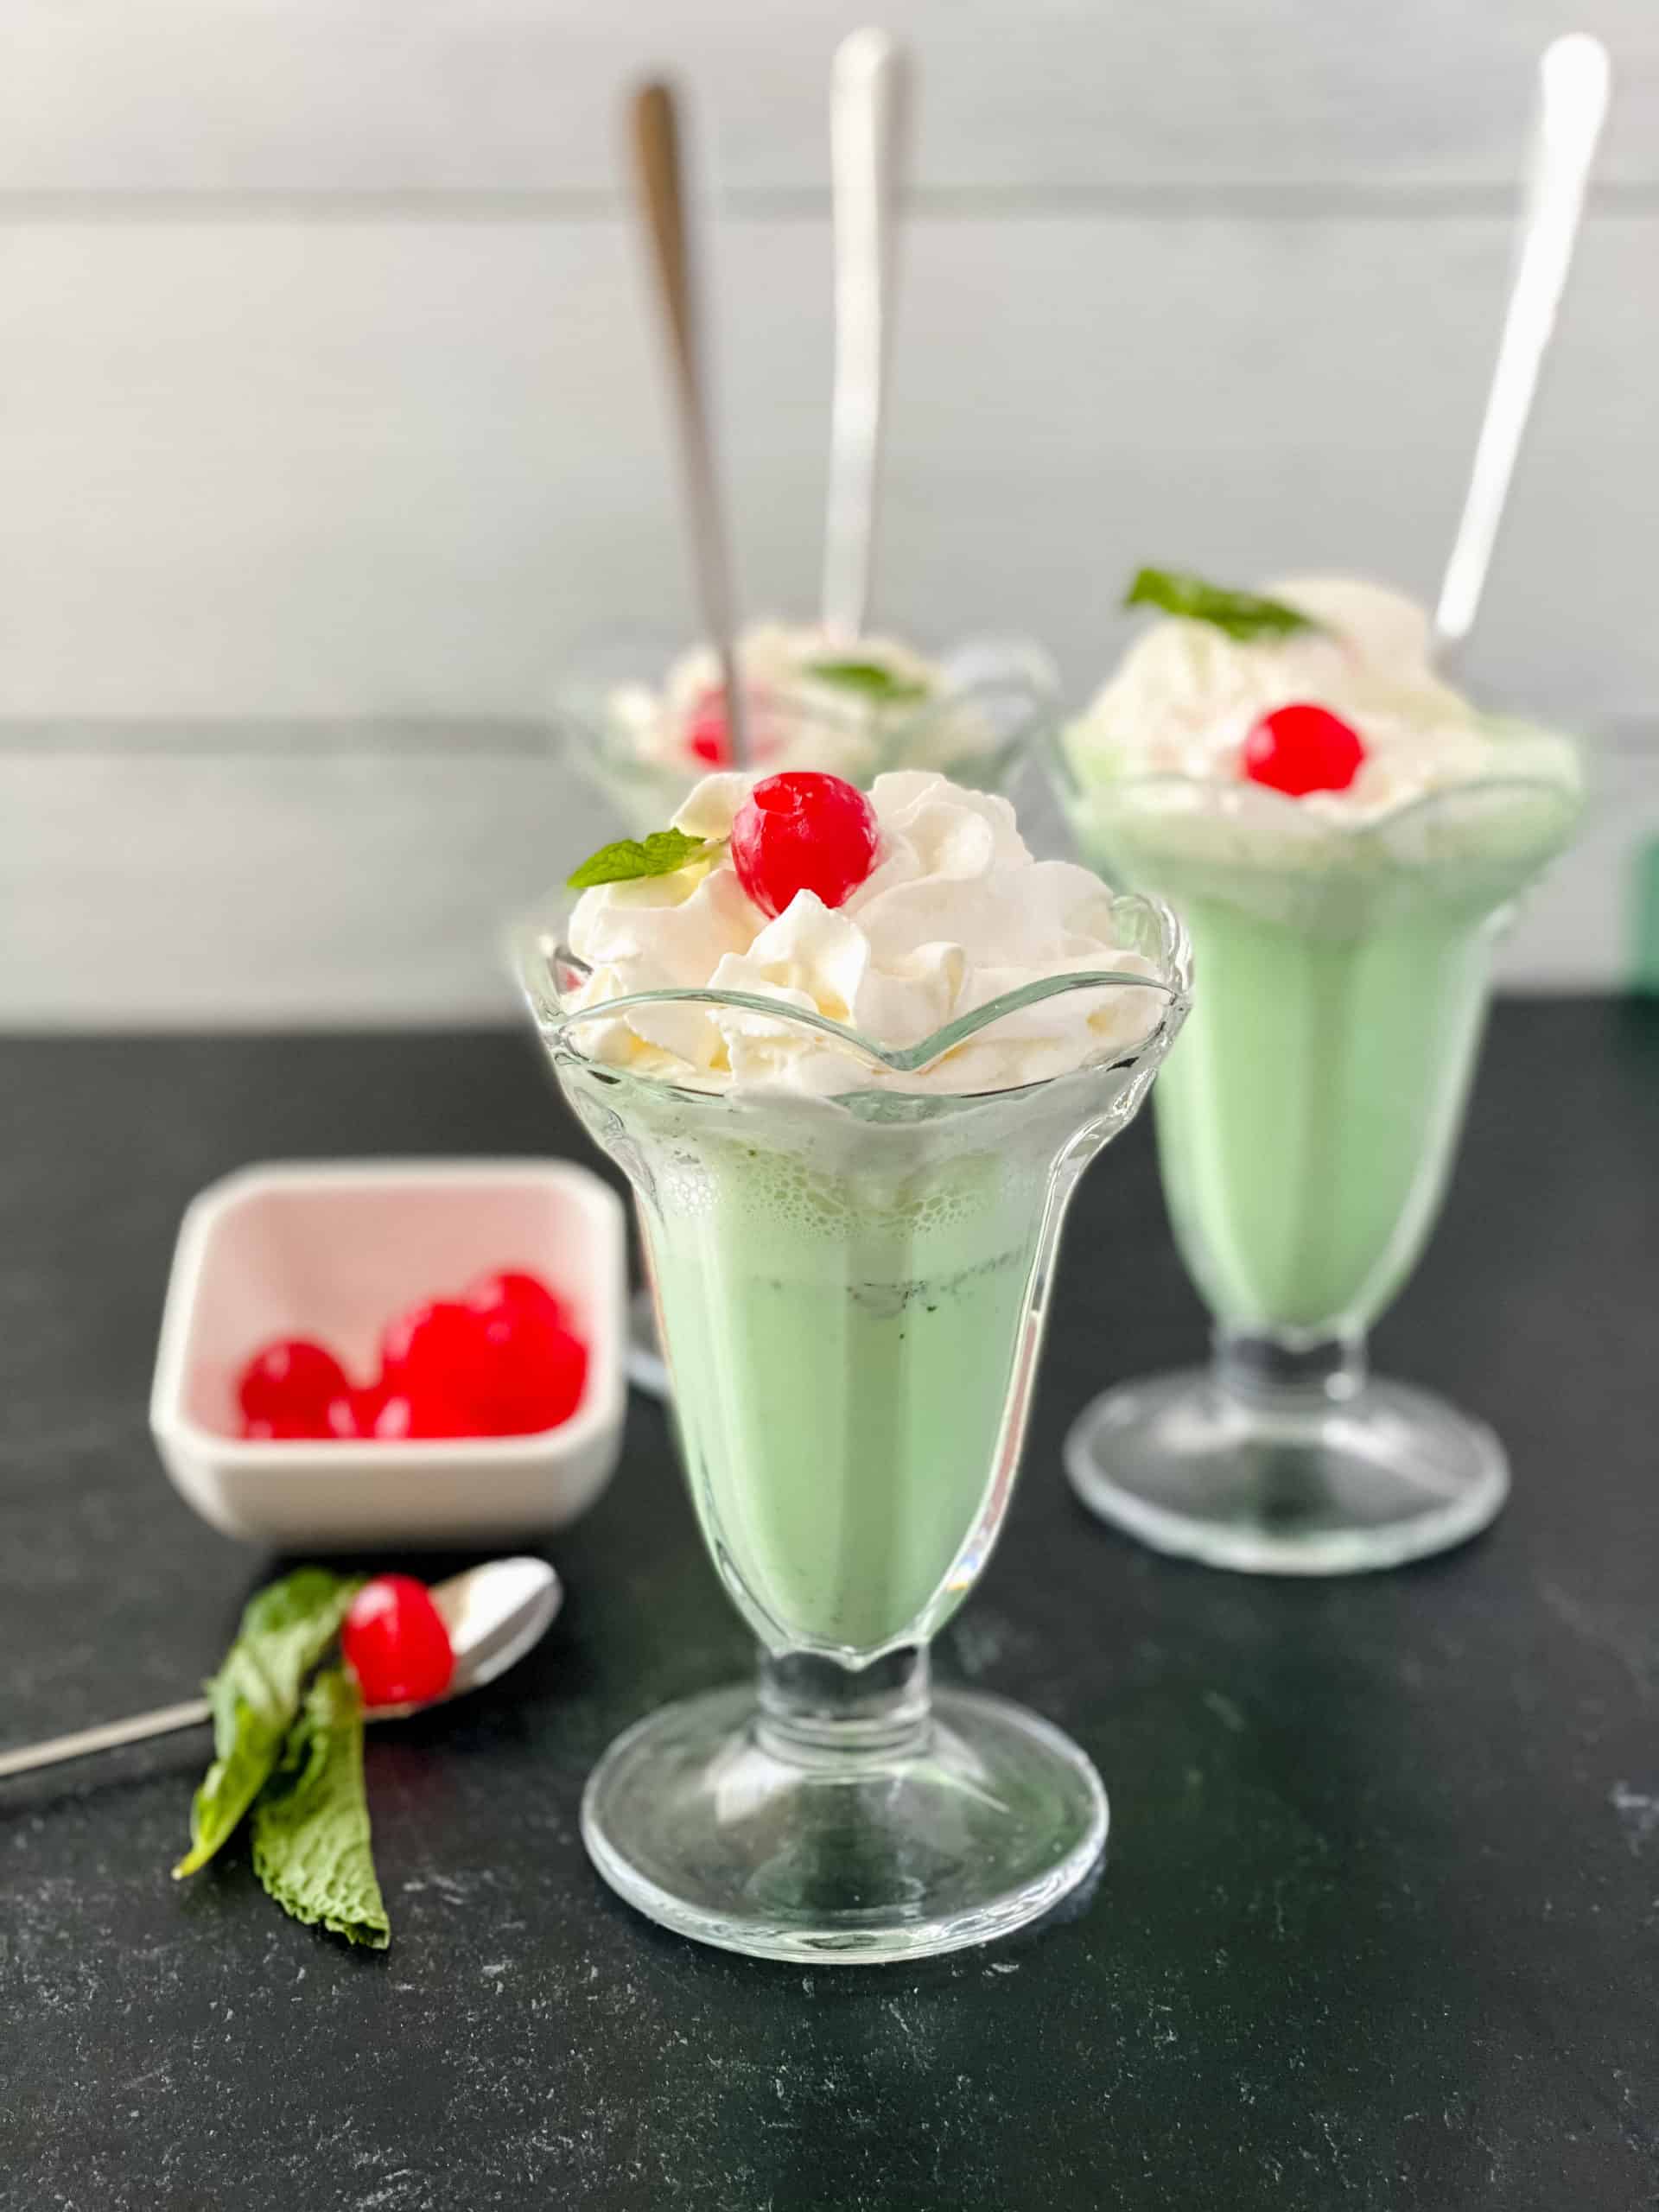 Several Shamrock Shakes with a white dish of cherries on the side